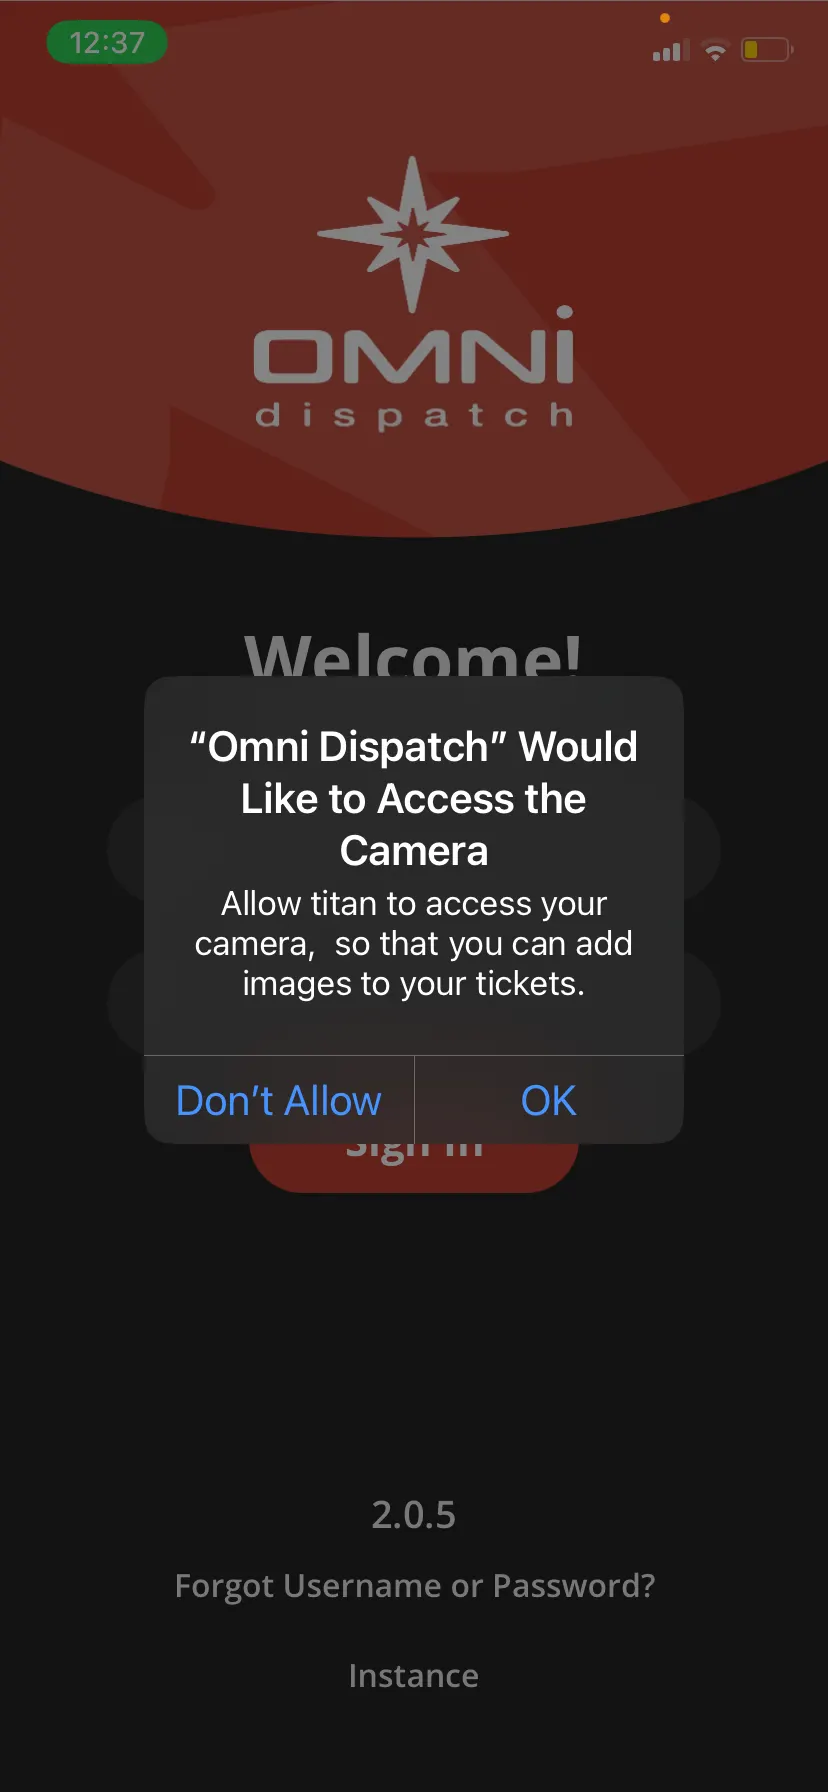 When asked to allow access to the camera, select OK.